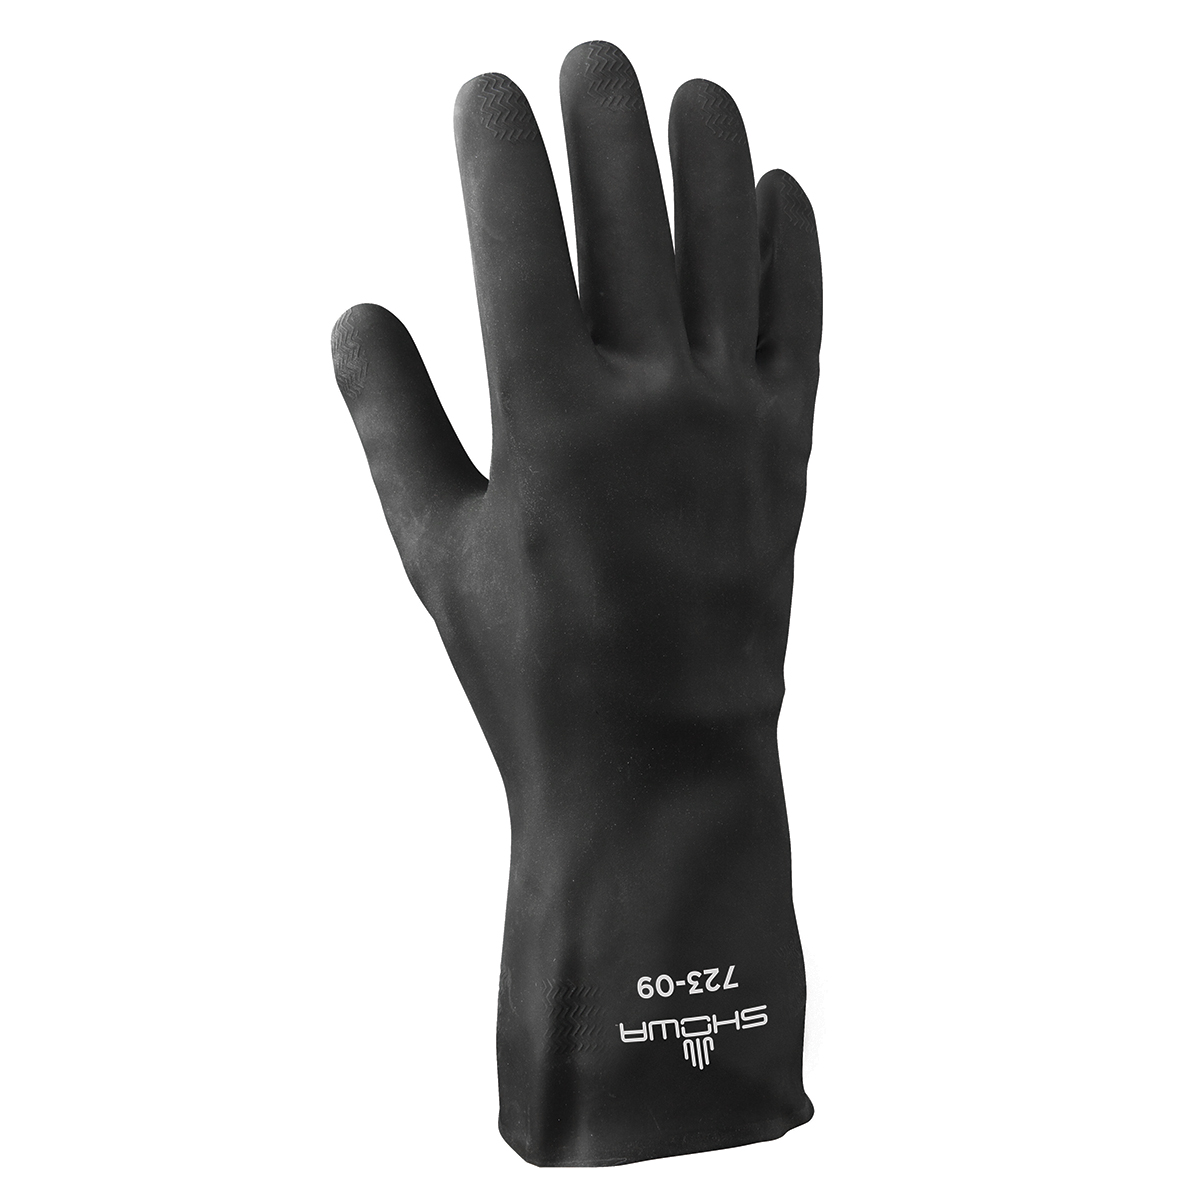 Chemical resistant unsupported neoprene, 13